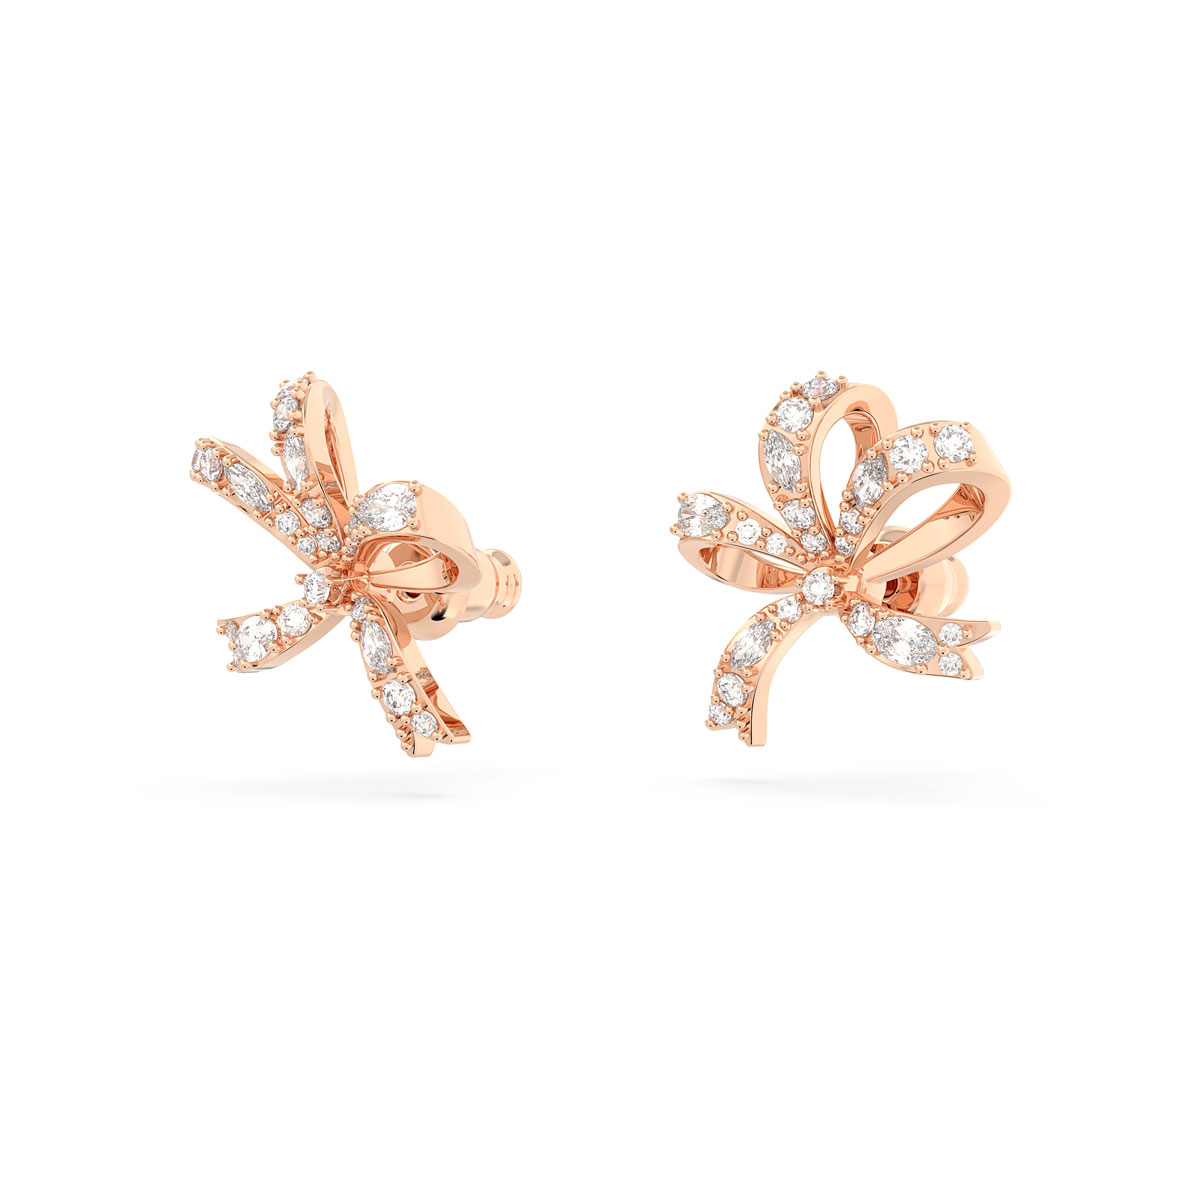 Swarovski Jewelry Volta Bow White and Rose Gold Pierced Earrings, Pair